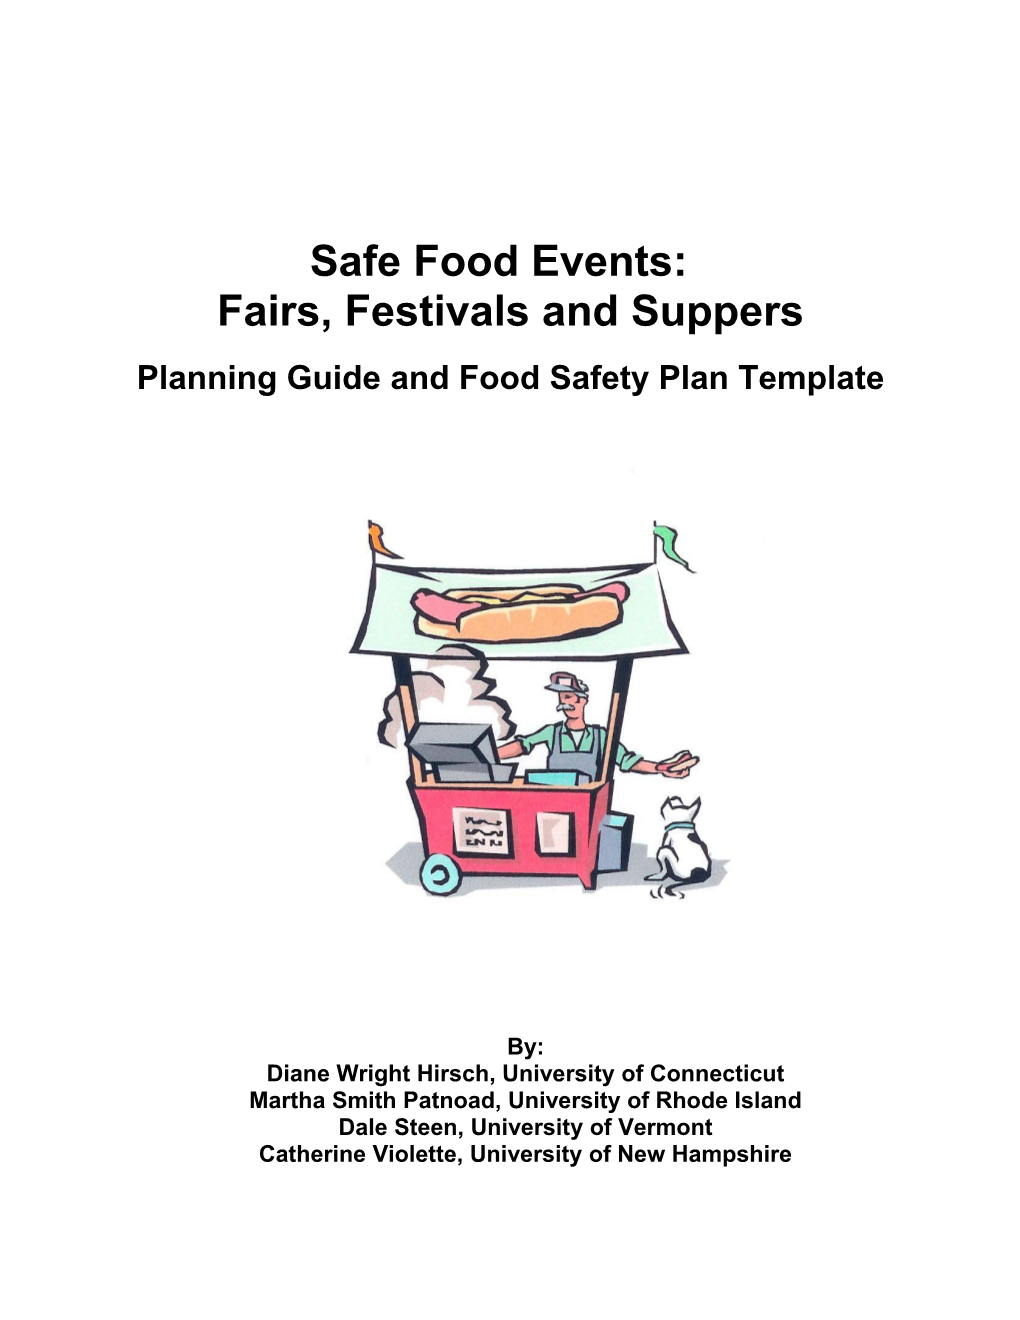 Planning Guide and Food Safety Plan Template